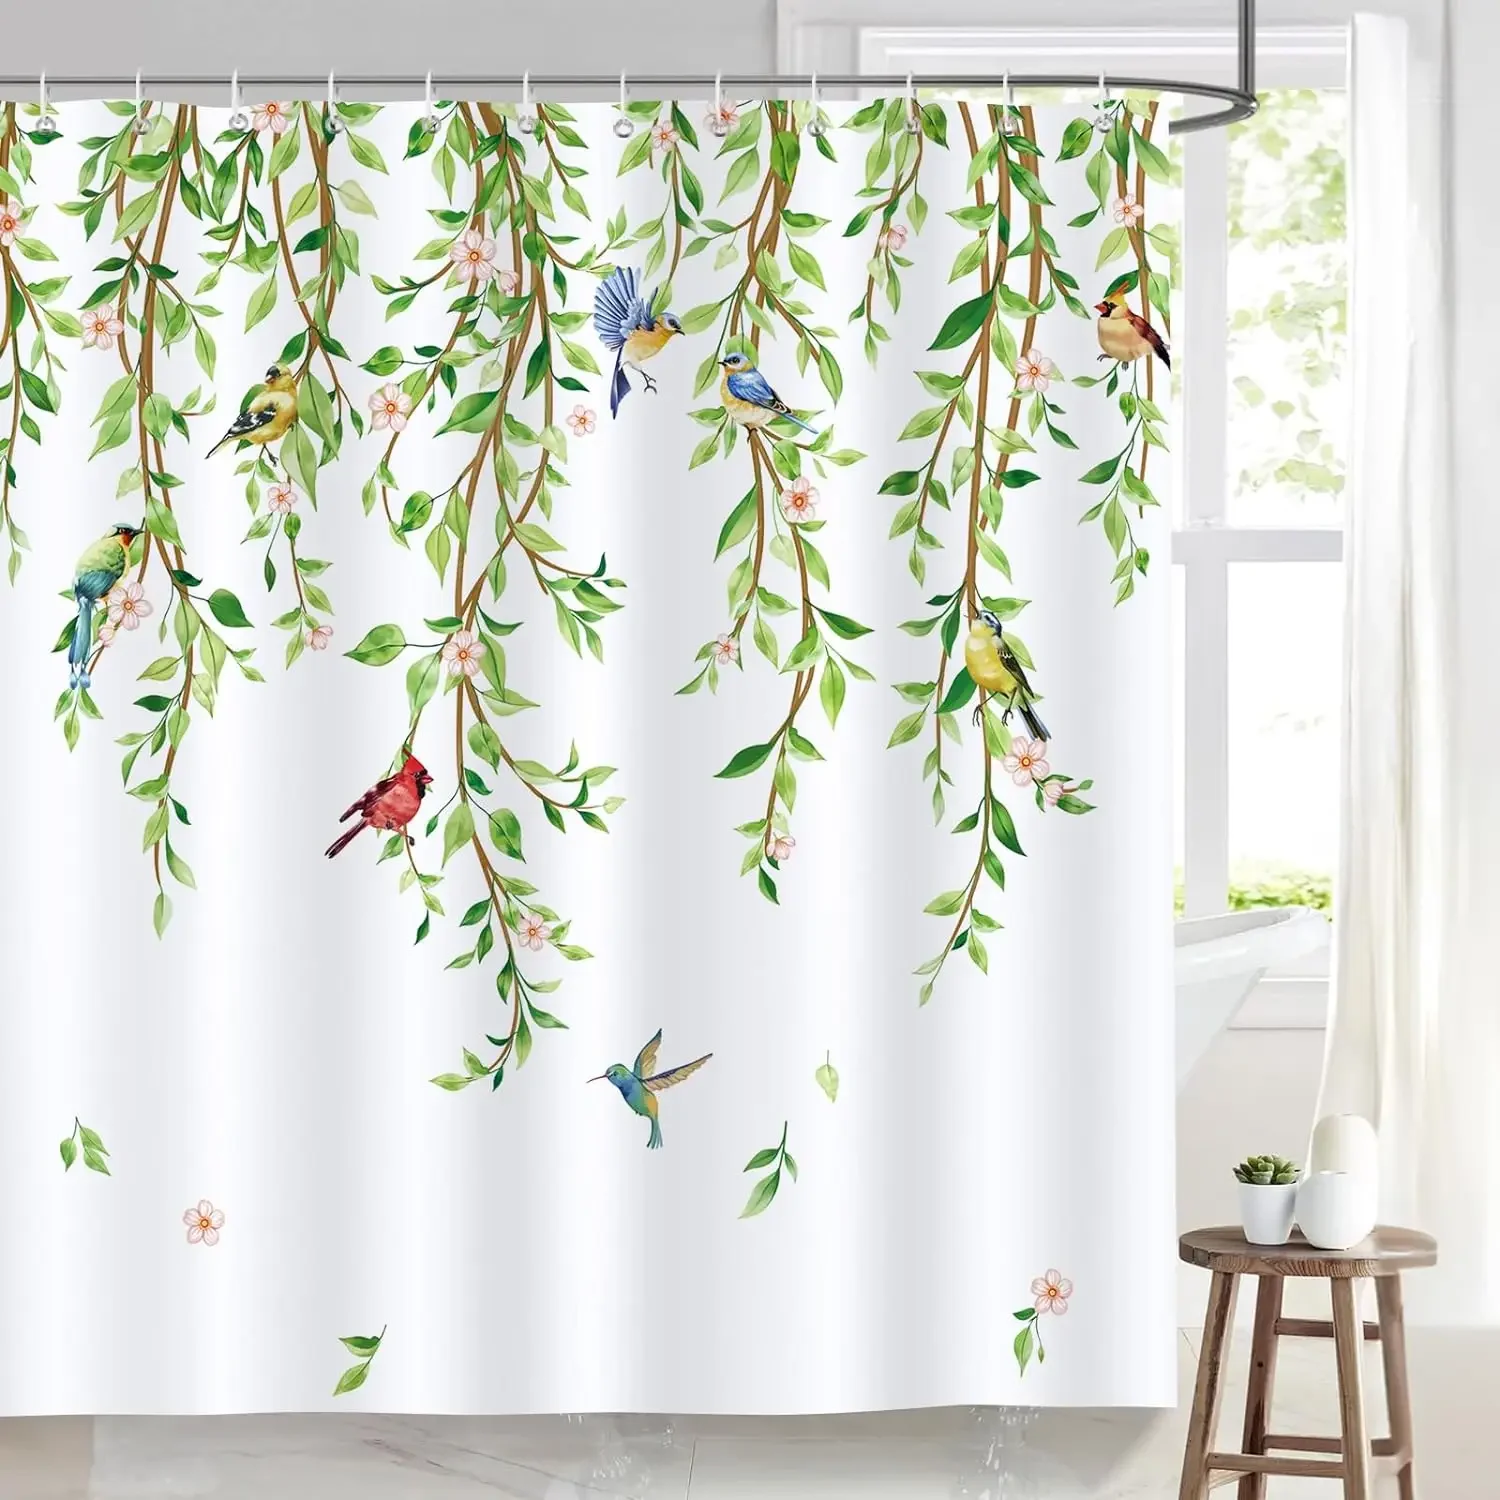 

Green Leaves Birds Shower Curtain Spring Hanging Vine watercolour Leaf Bath Curtains Polyester Fabric Bathroom Decor with Hooks